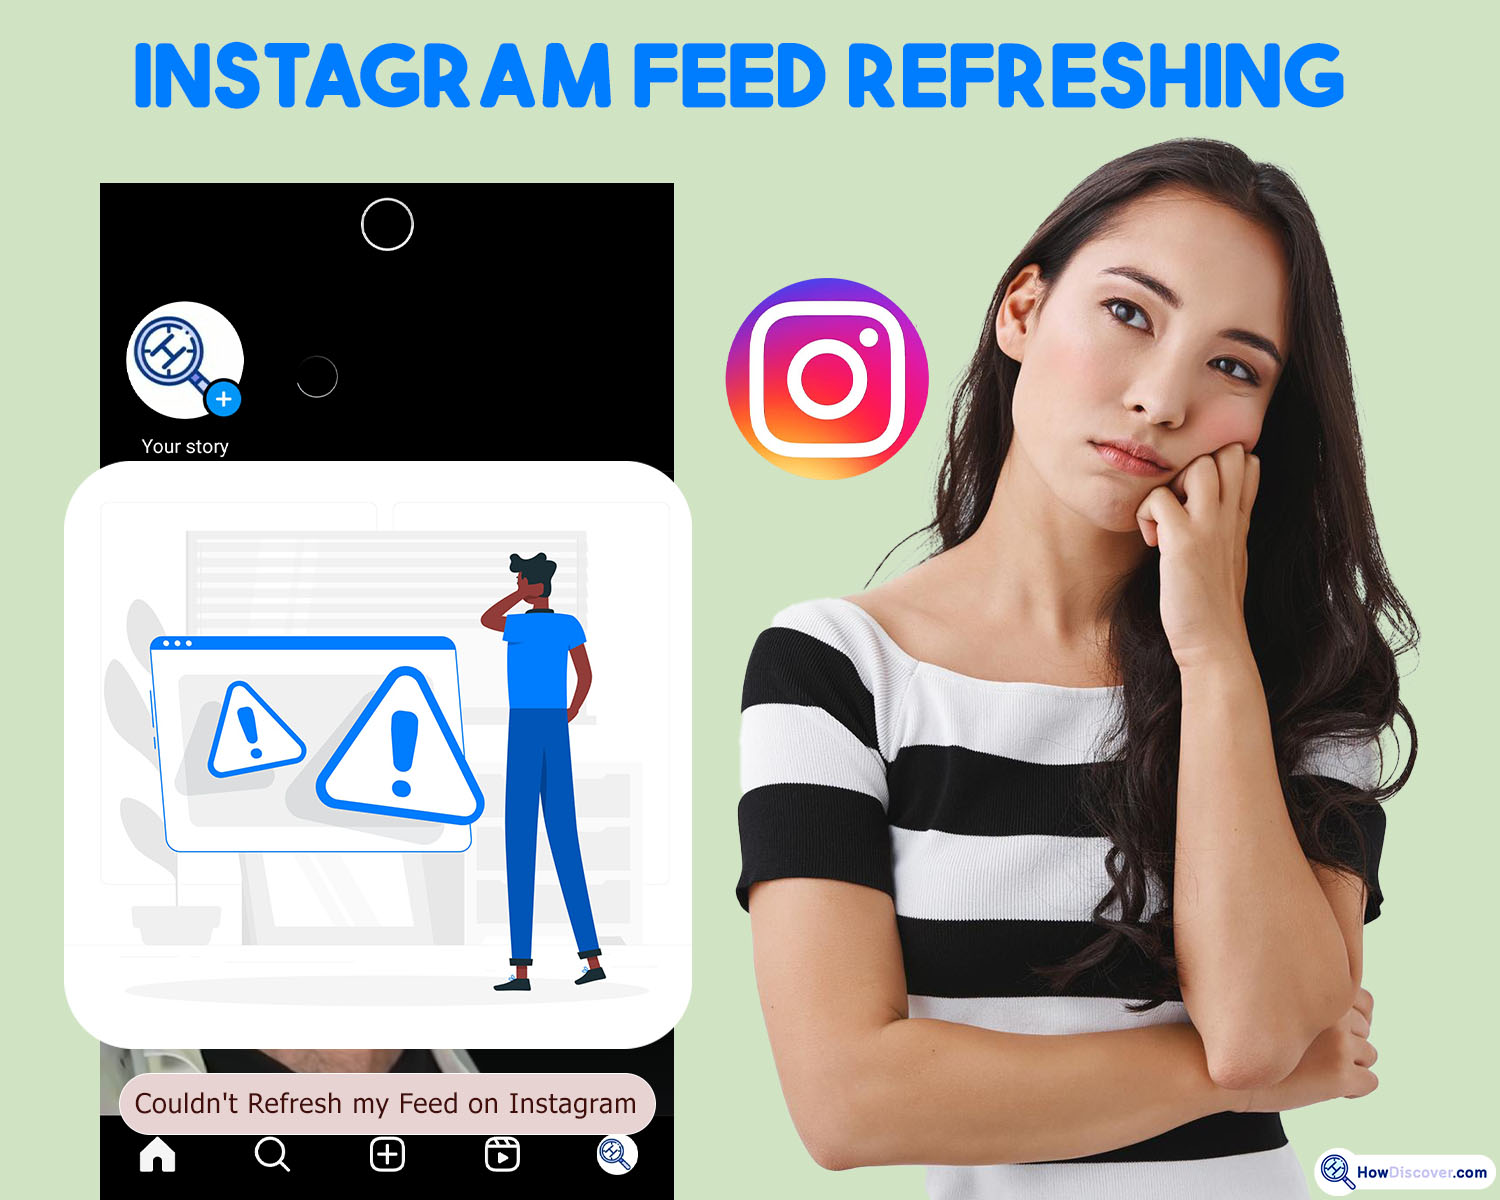 Instagram Feed Refreshing - Couldn't Refresh my Feed on Instagram, Am I Blocked